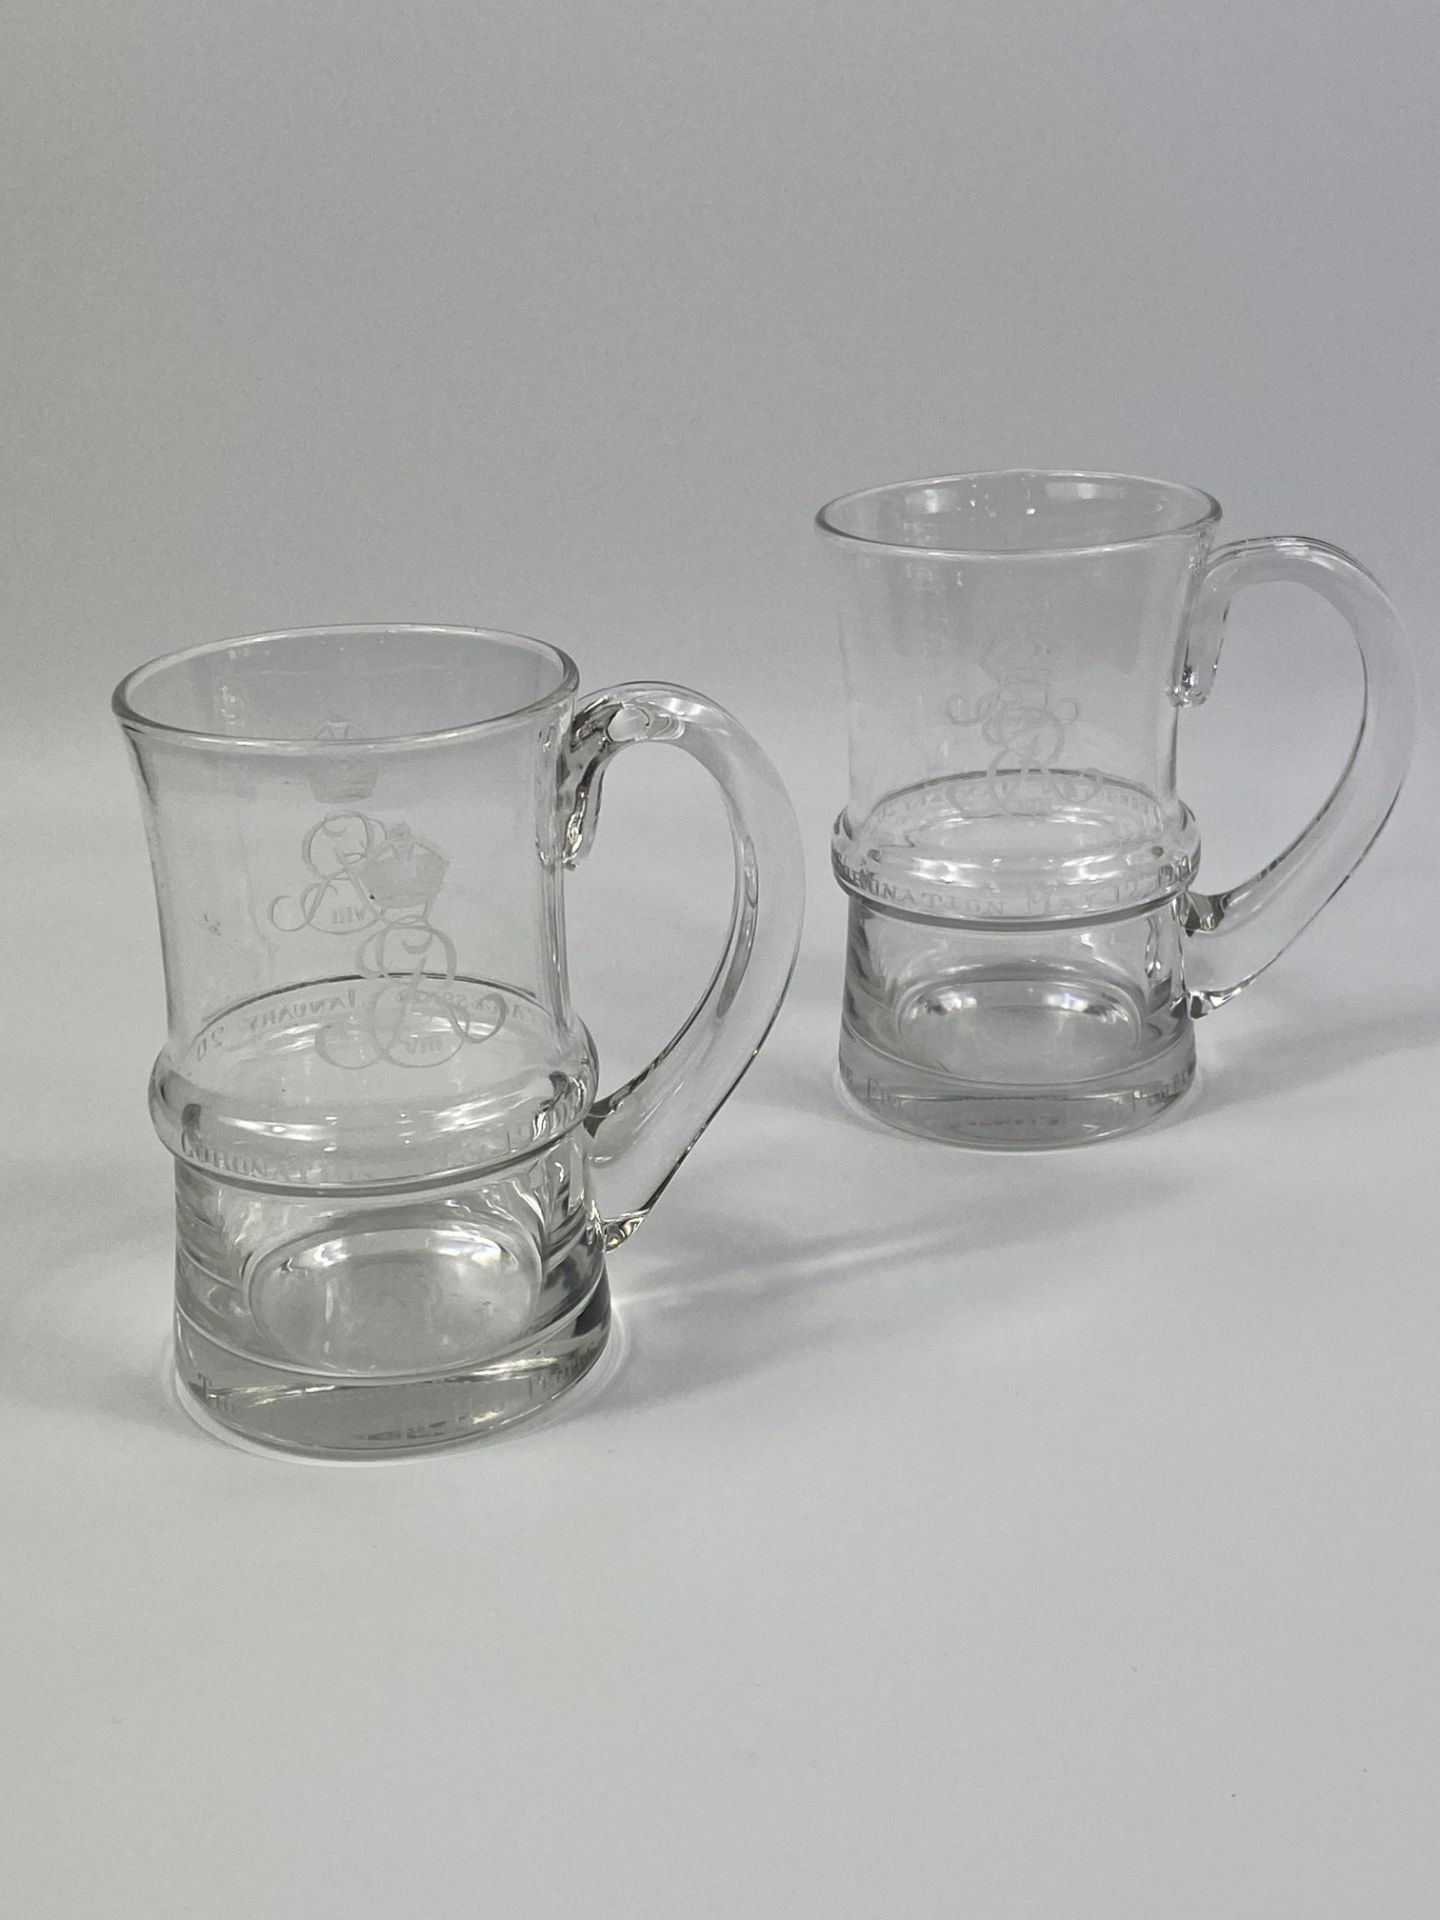 Two limited edition Edward VIII glass tankards retailed by Thomas Goode.